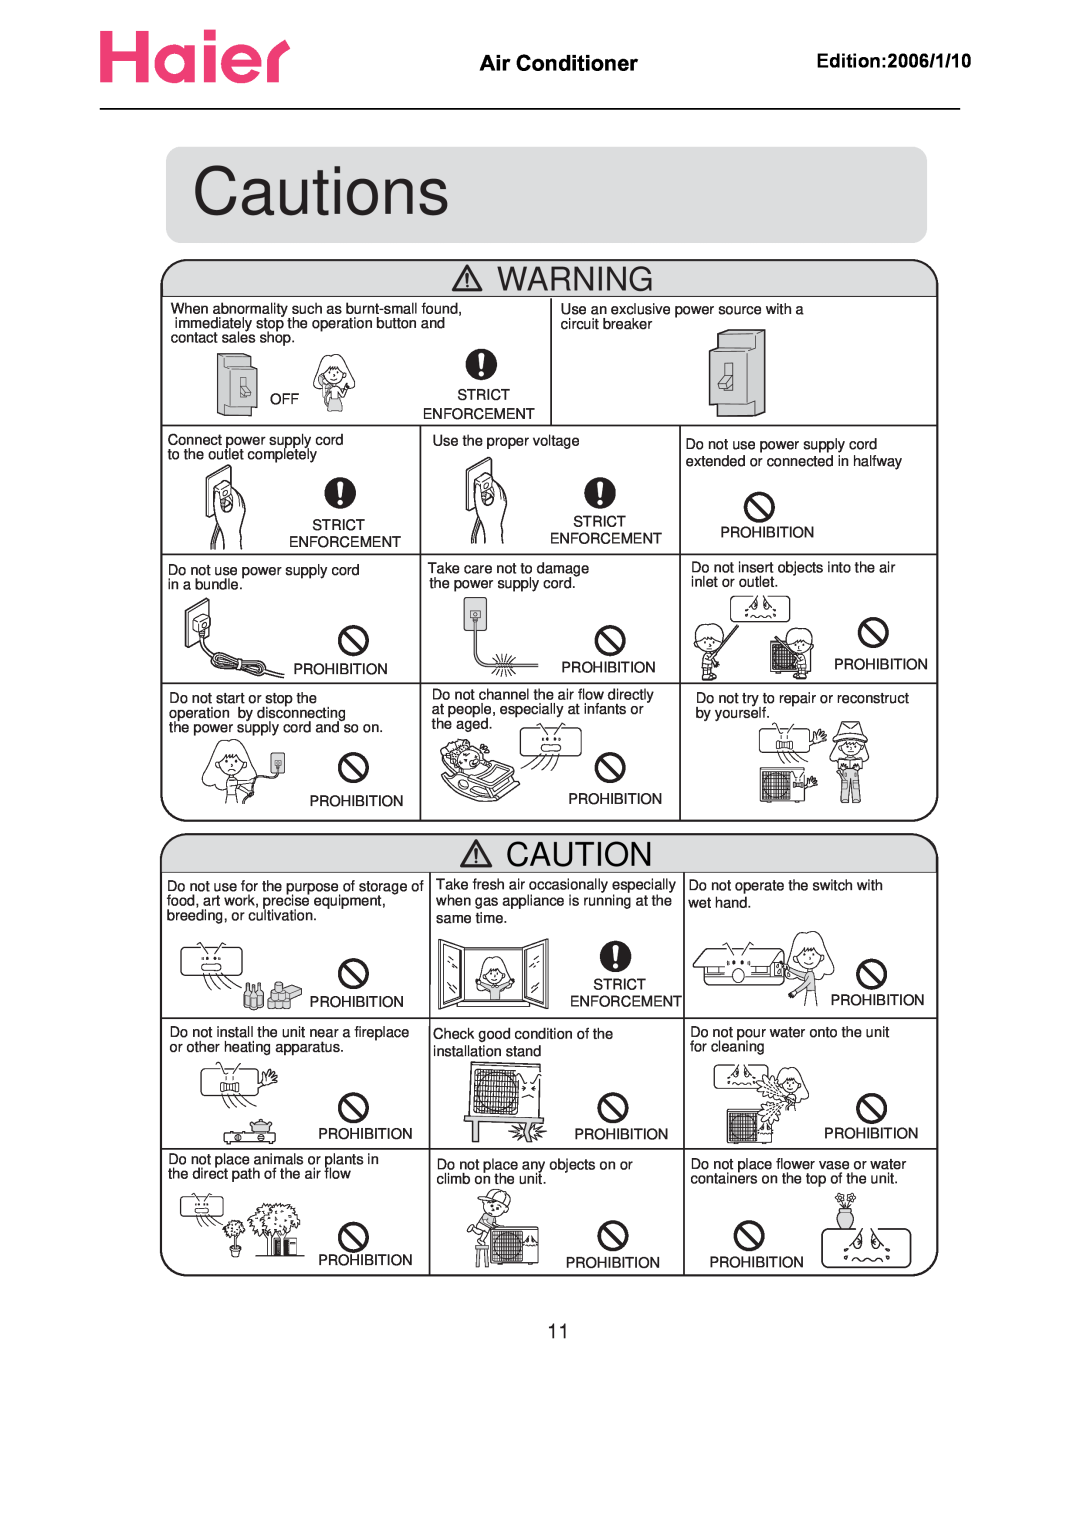 Haier Compact Air Conditioner manual Cautions, Air Conditioner      , Edition 2006/1/10, Strict 